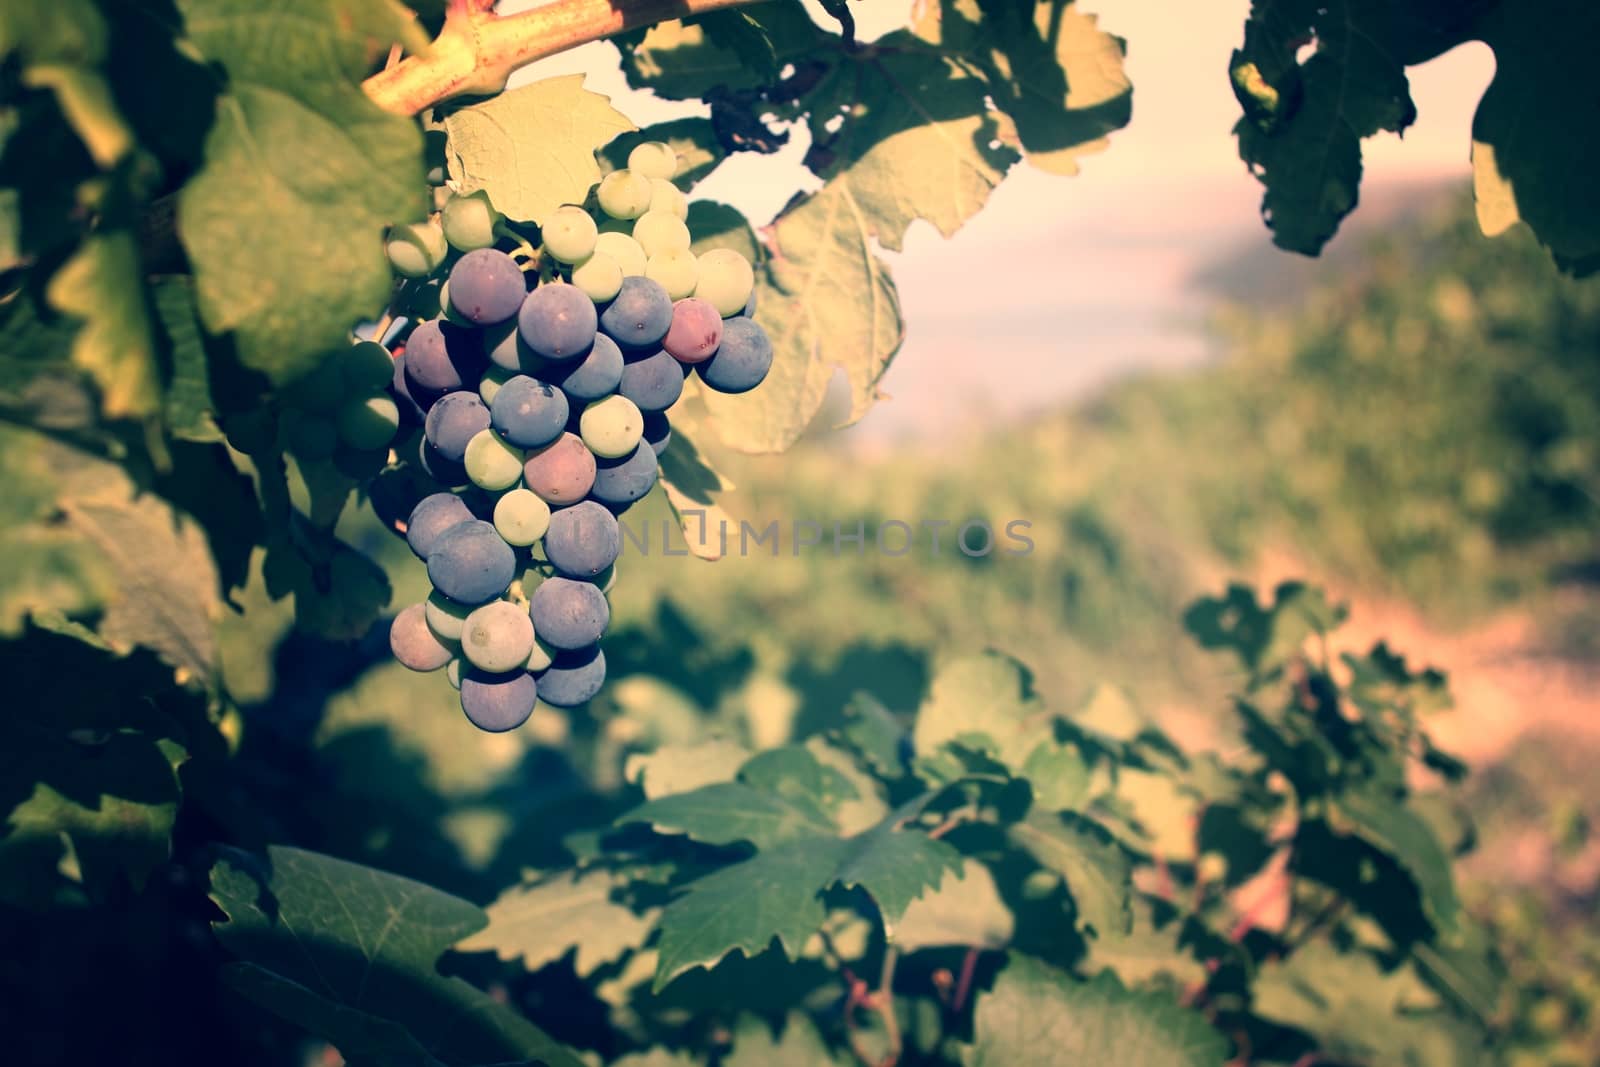 Grapes in the vineyard by Barbraford